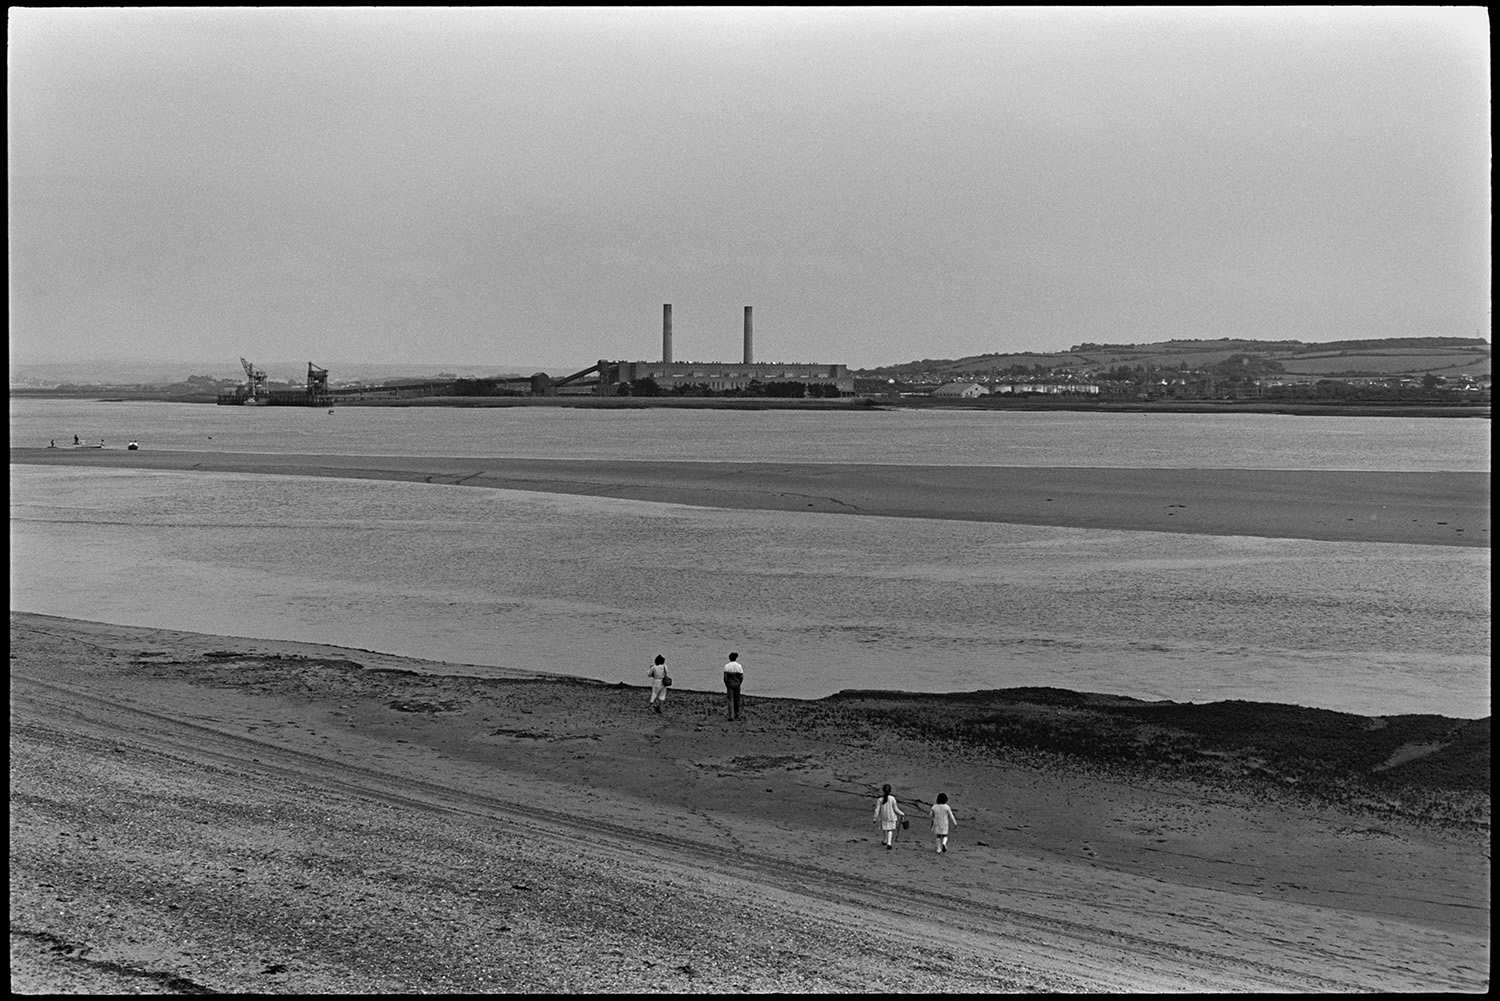 View across estuary with beach and distant power station. 
[A woman, man and two children walking along the beach at Braunton Burrows. They are looking across the estuary to Yelland Power Station.]